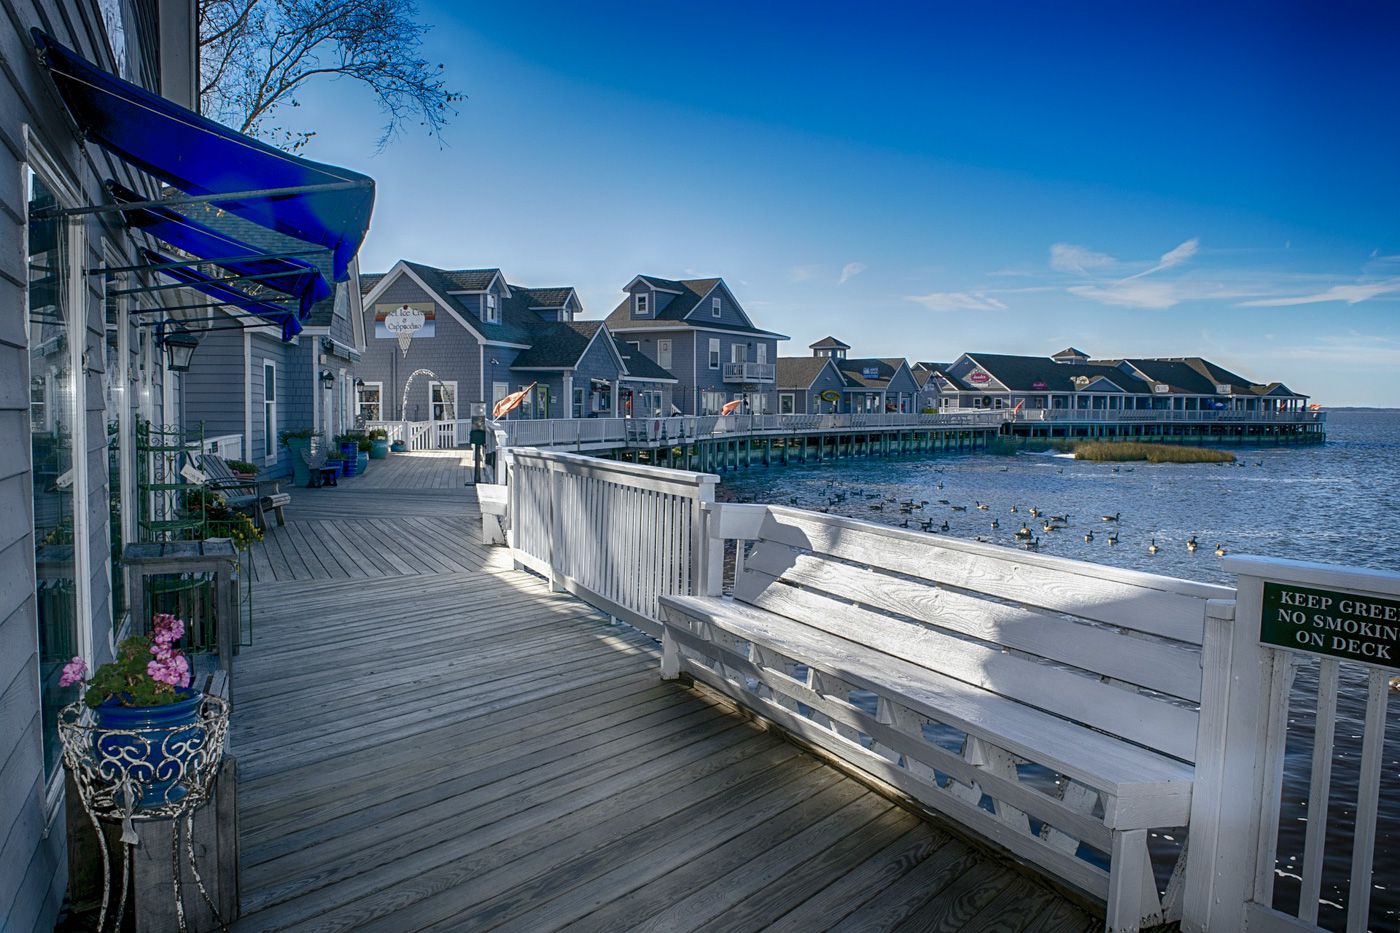 North Carolina Travel Costs & Prices - The Outer Banks, the Piedmont